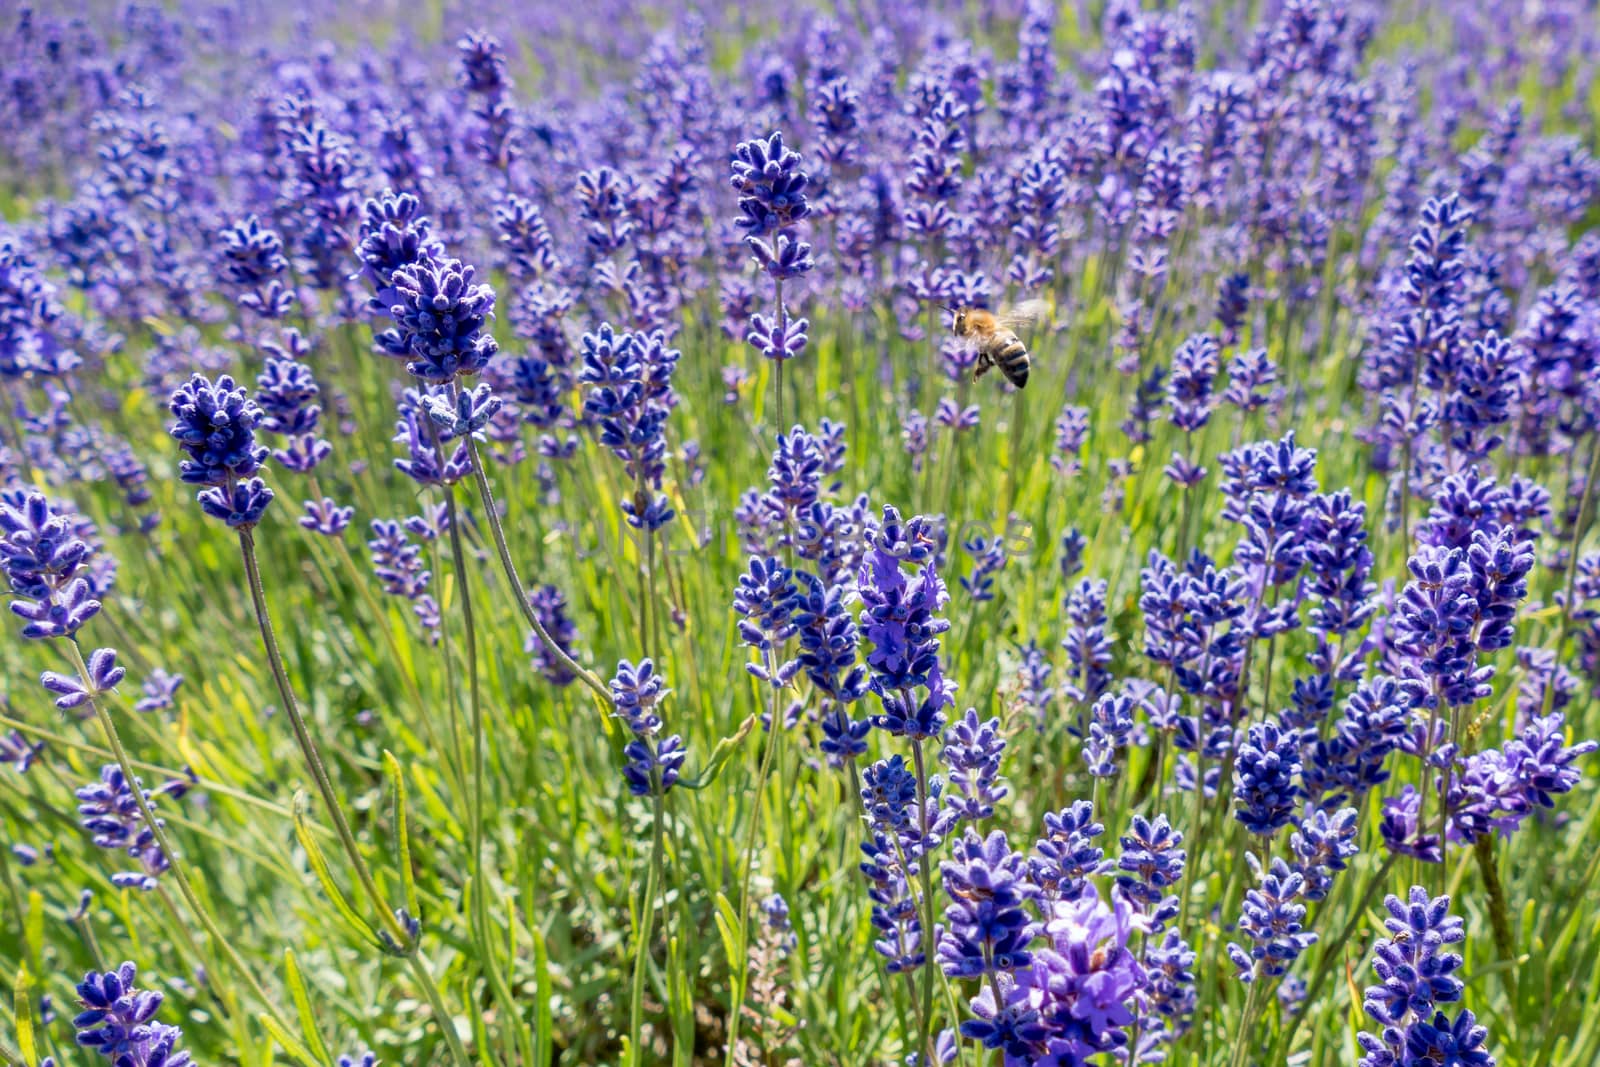 Bee in a Field of Lavender by phil_bird